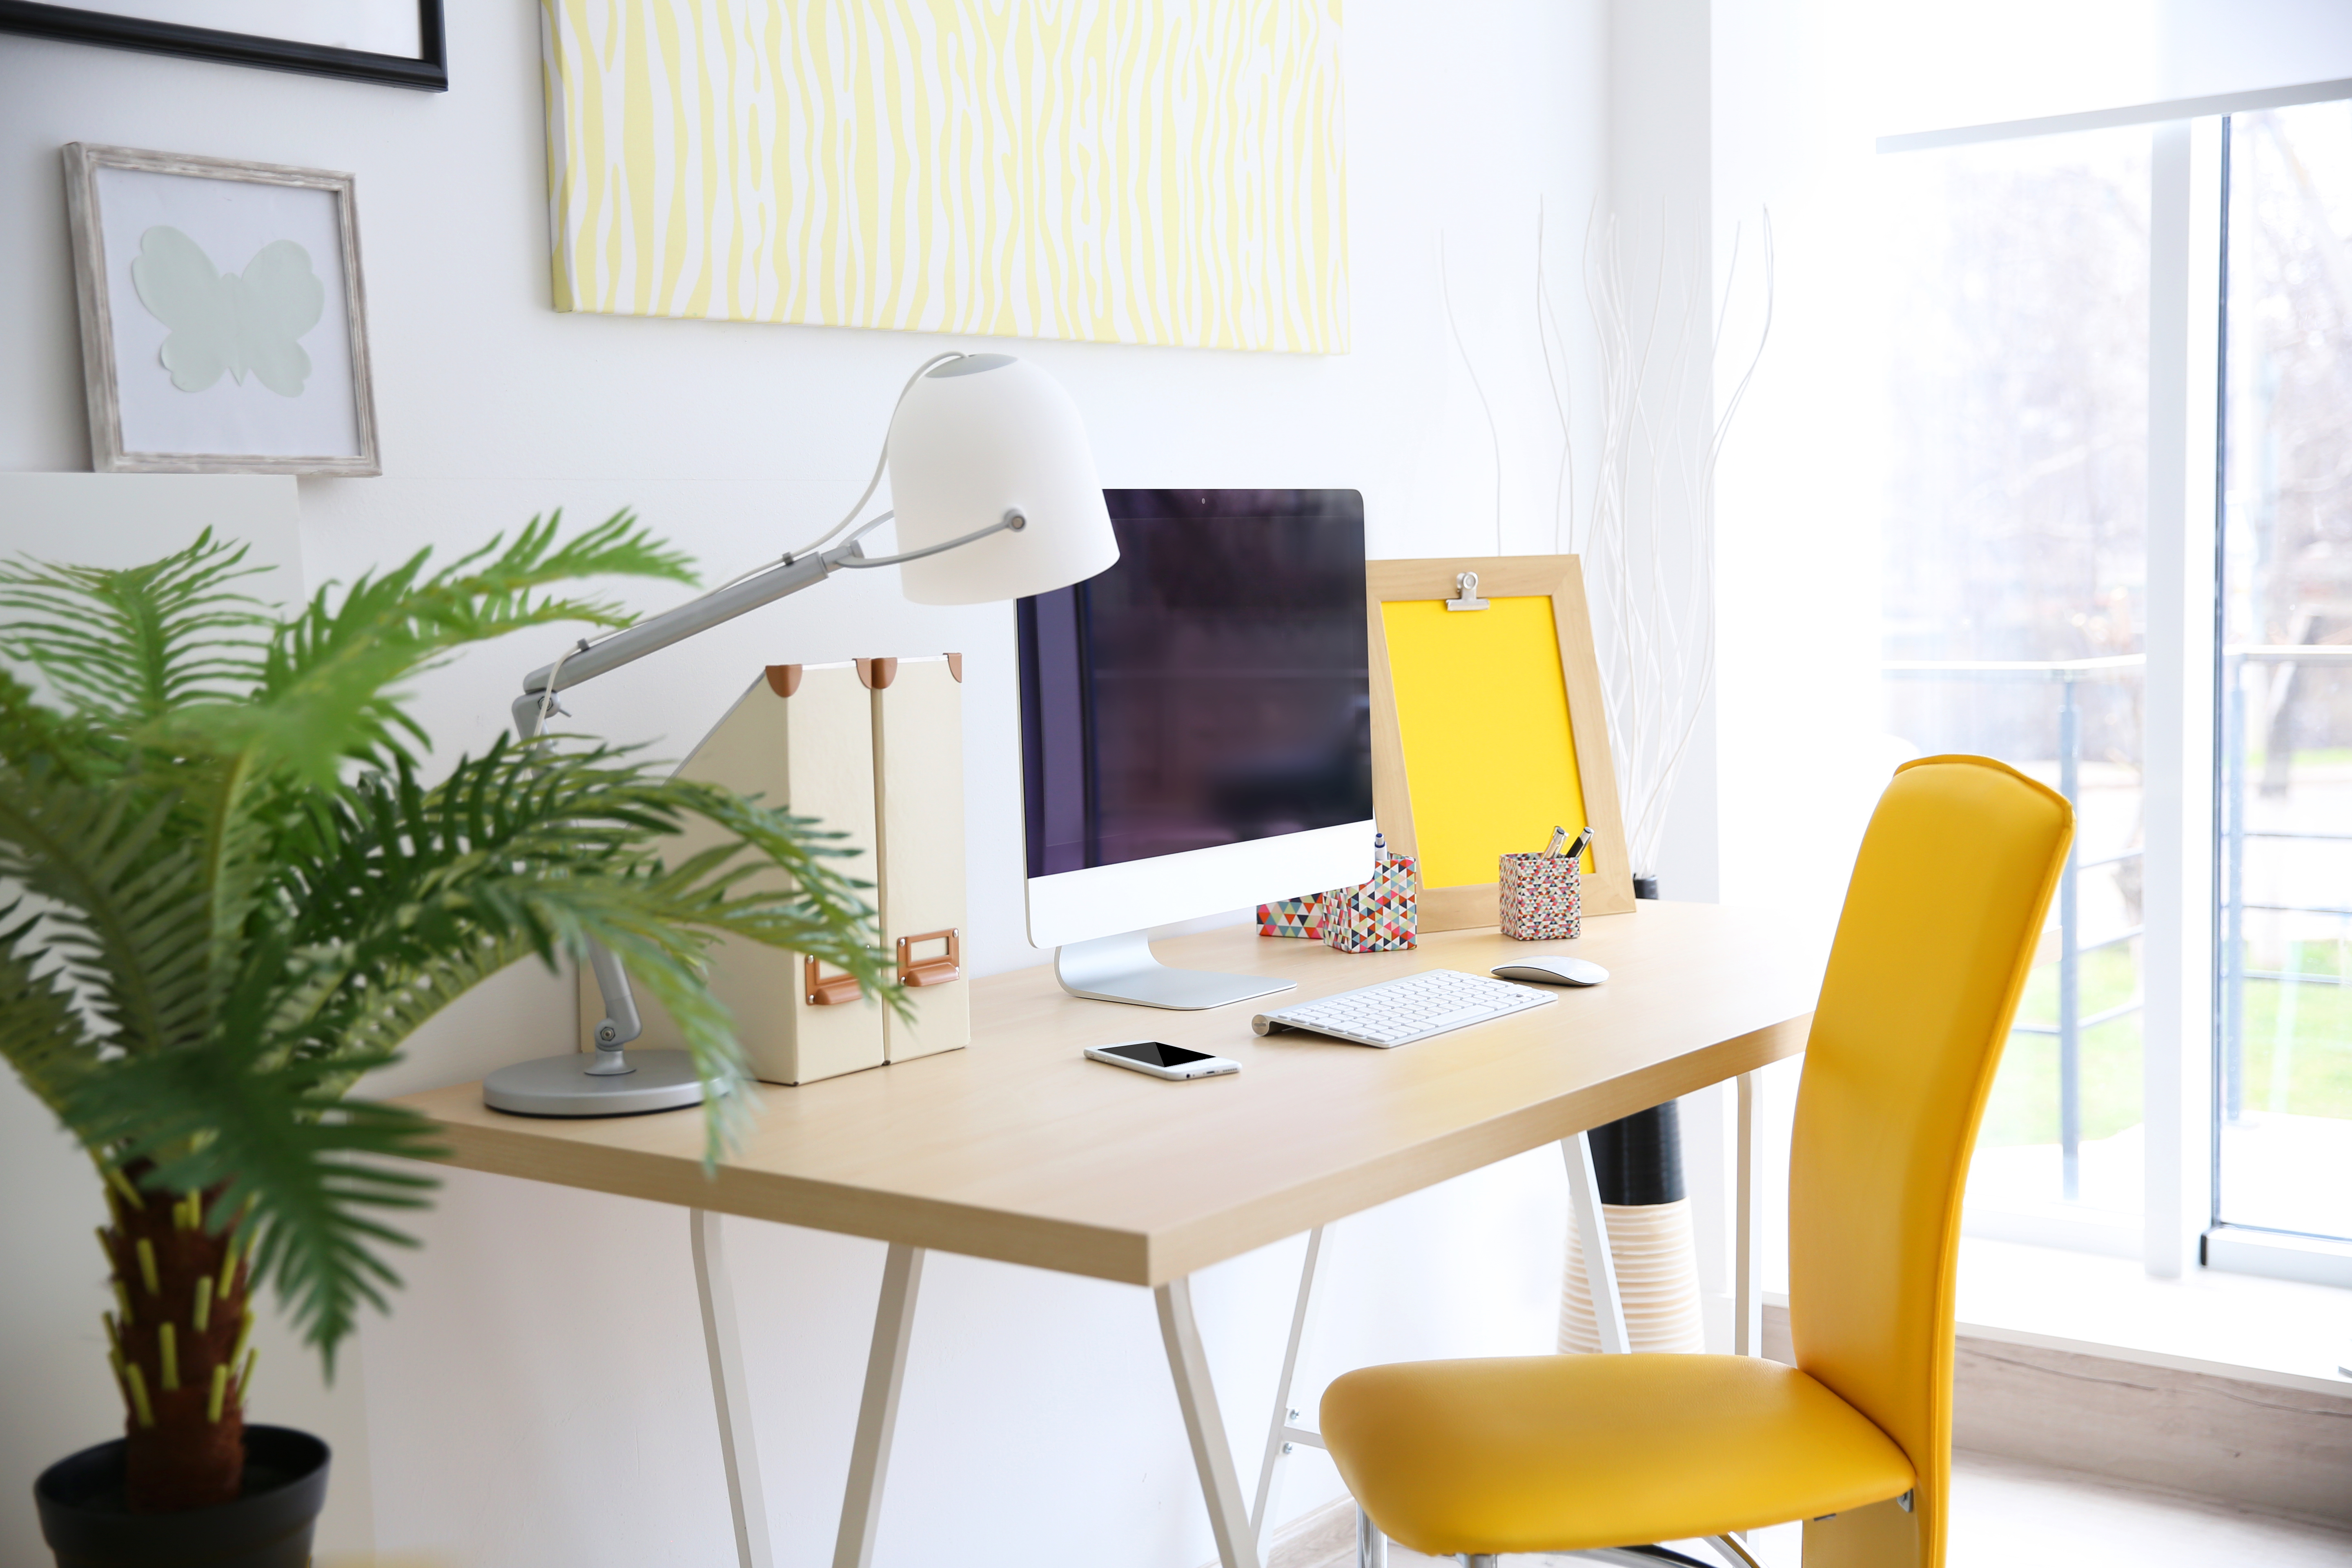 Find the Right Desk for Your Work Style